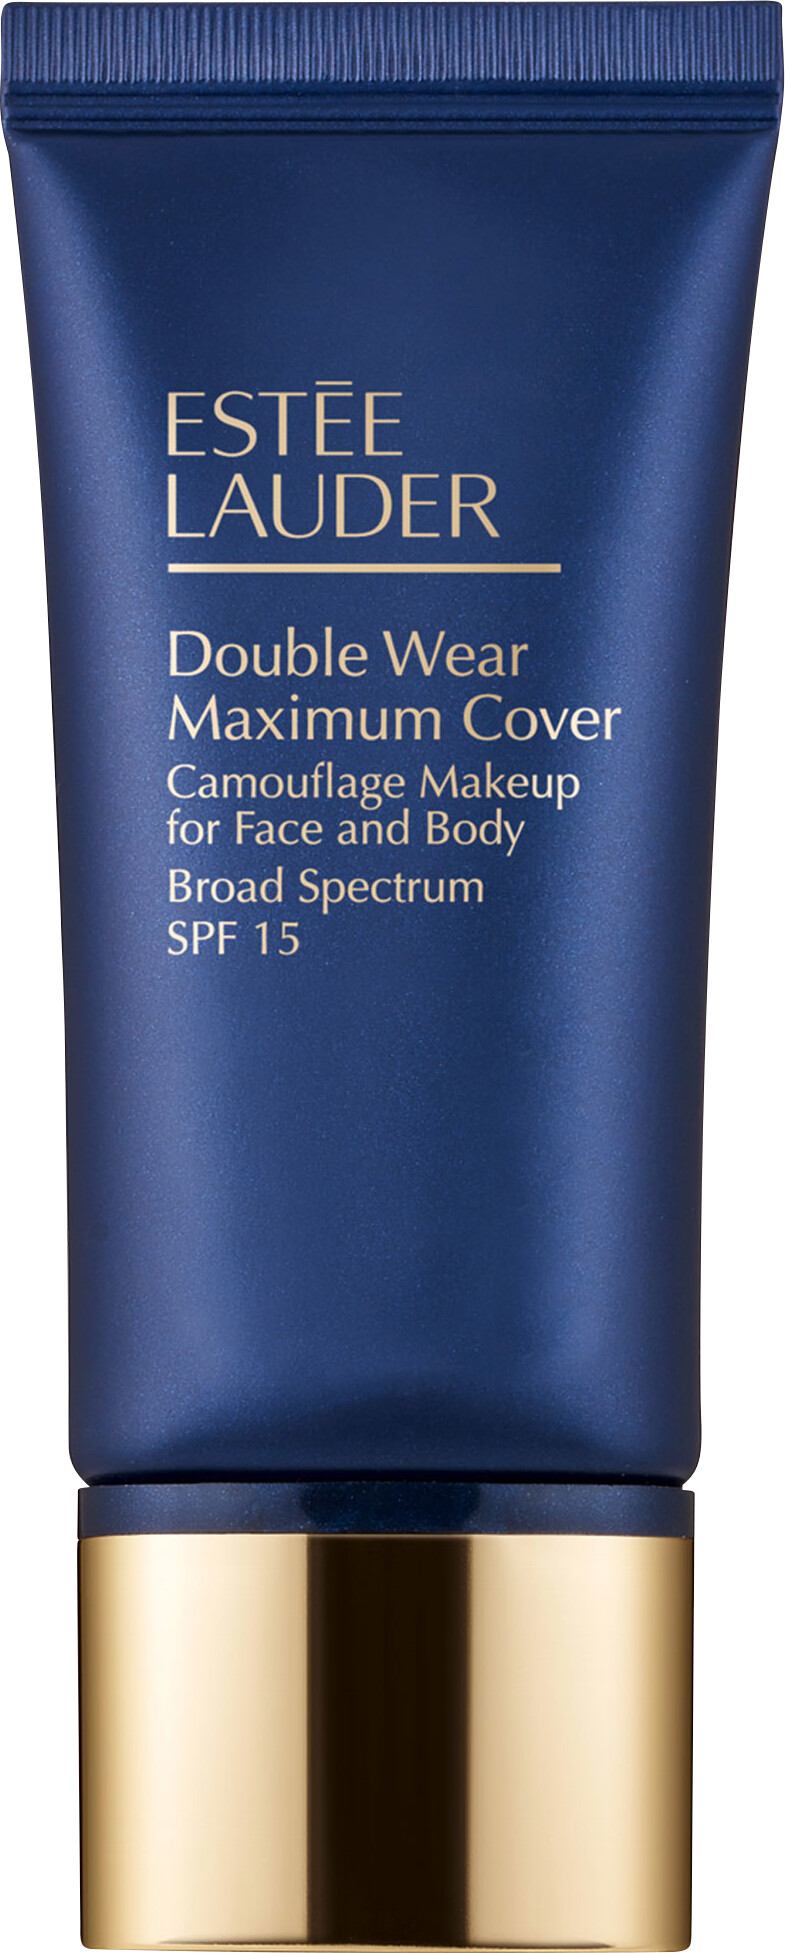 Estee Lauder Double Wear Maximum Cover Camouflage Foundation SPF15 30ml 1N1 - Ivory Nude